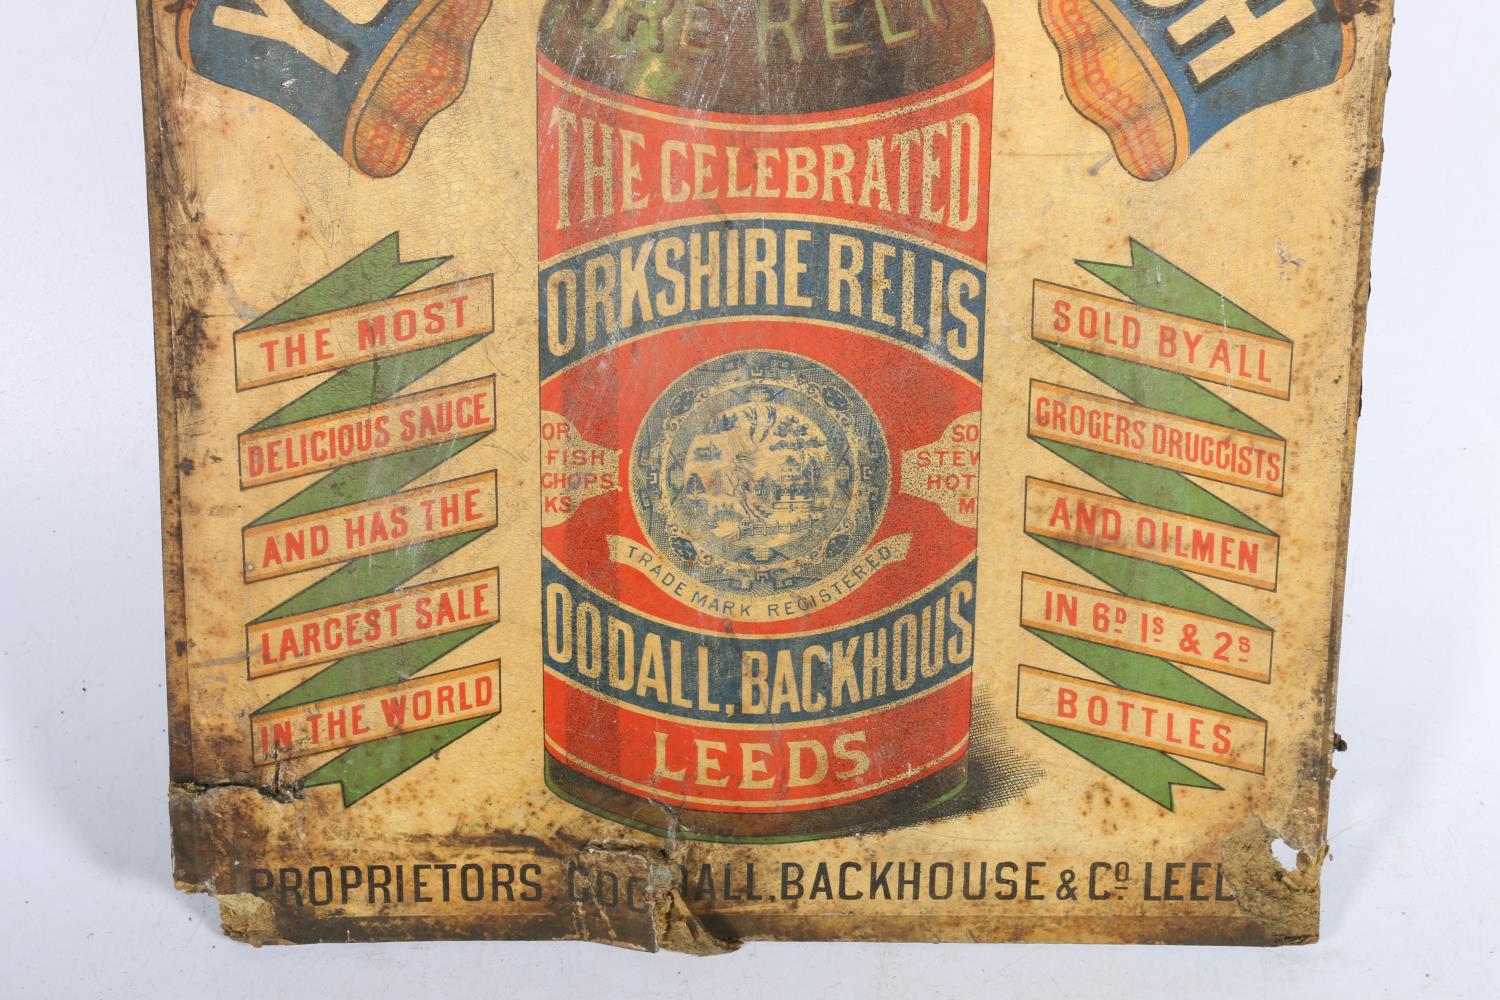 Vintage advertisement sign for 'The Celebrated Yorkshire Relish', 48cm x 31cm. - Image 3 of 4